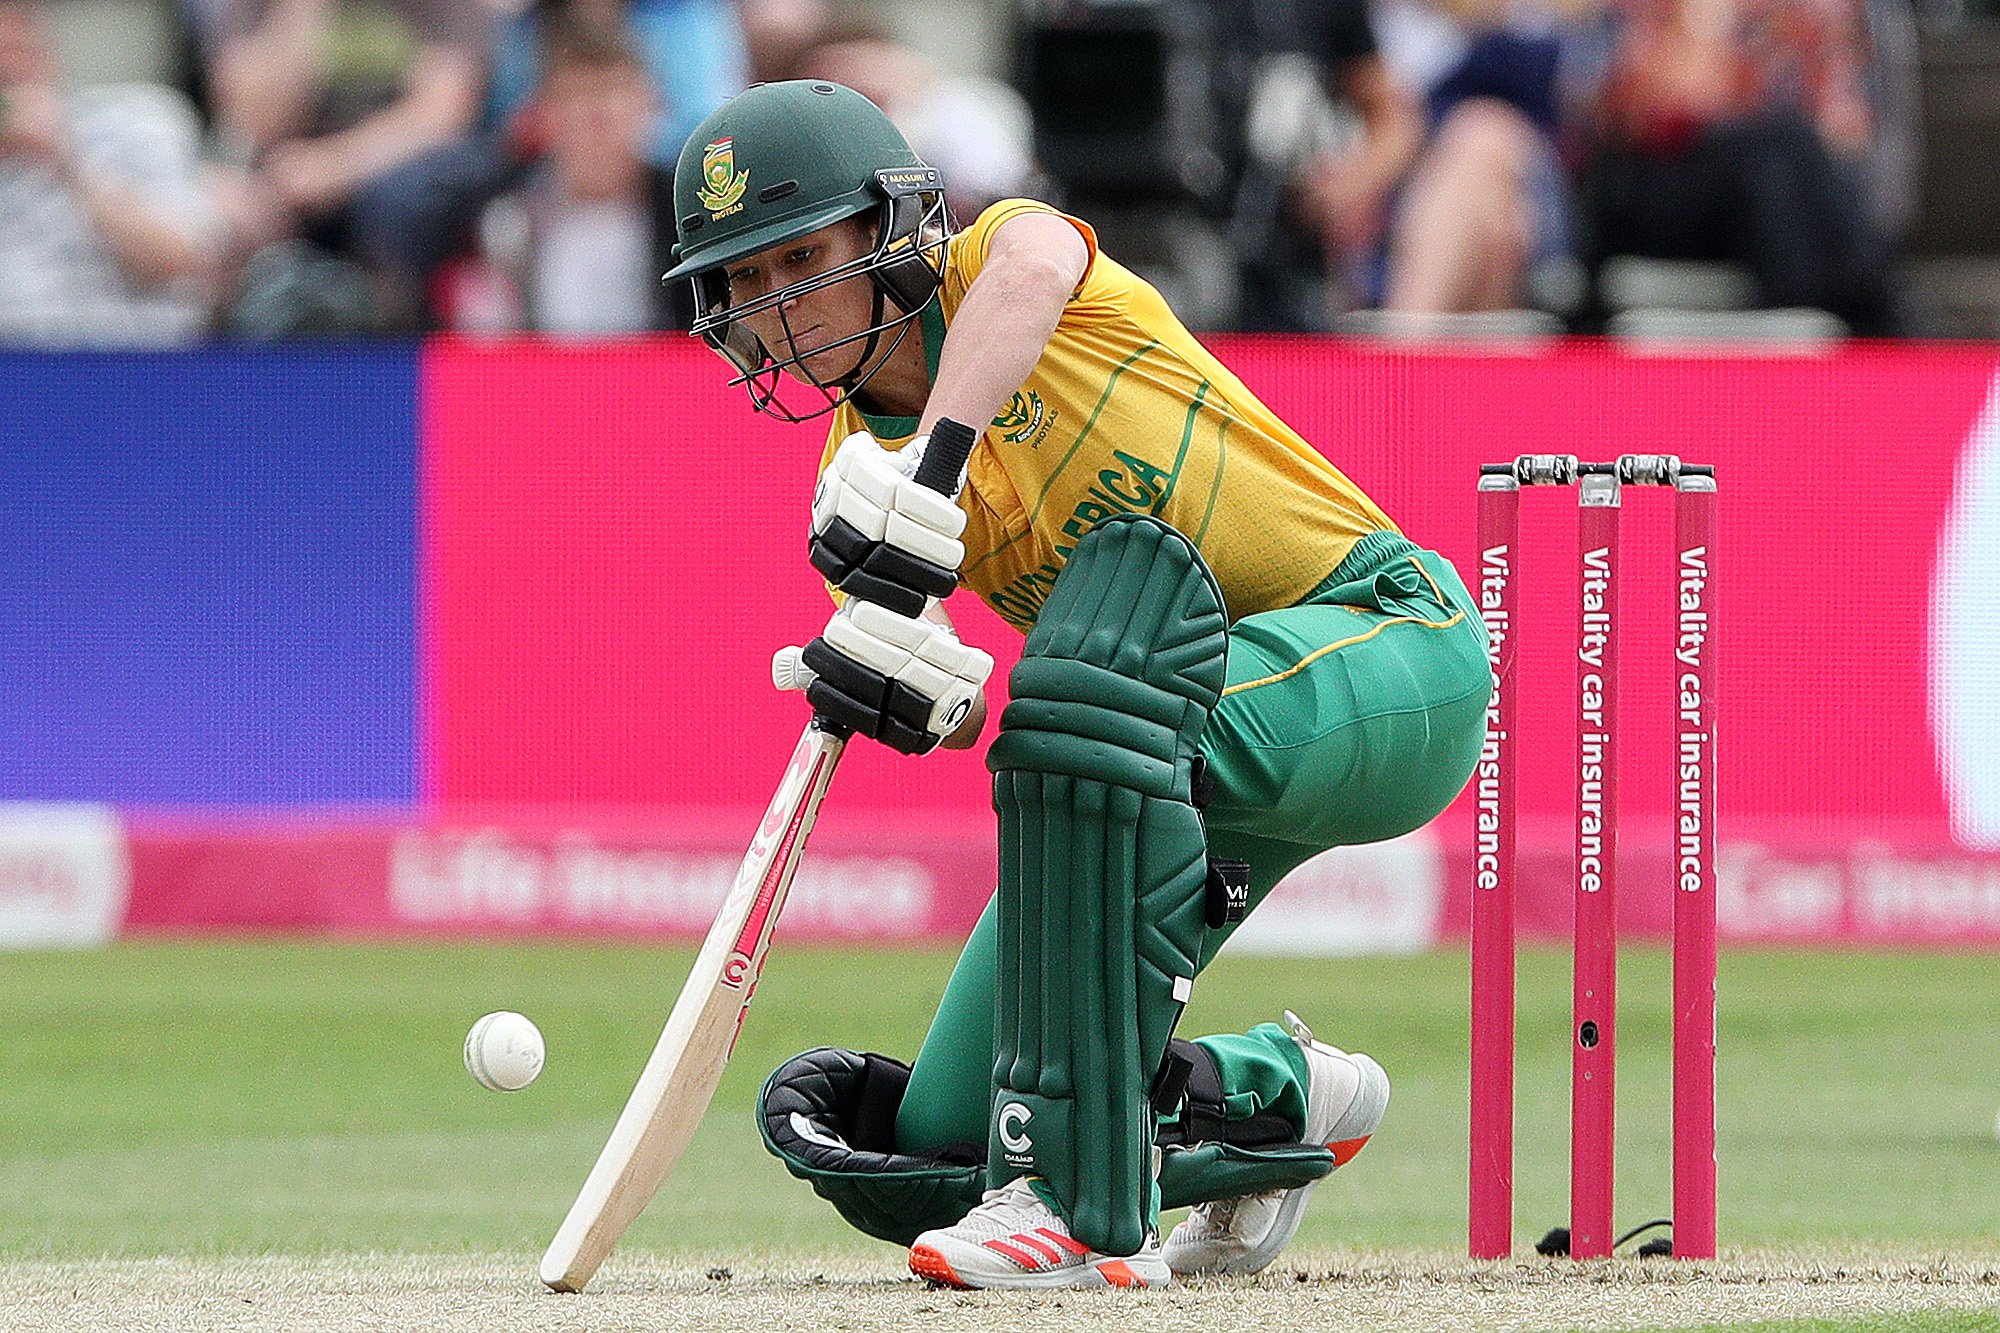 CSA: Bosch has sights on 2023 T20 World Cup squad berth after up and down year